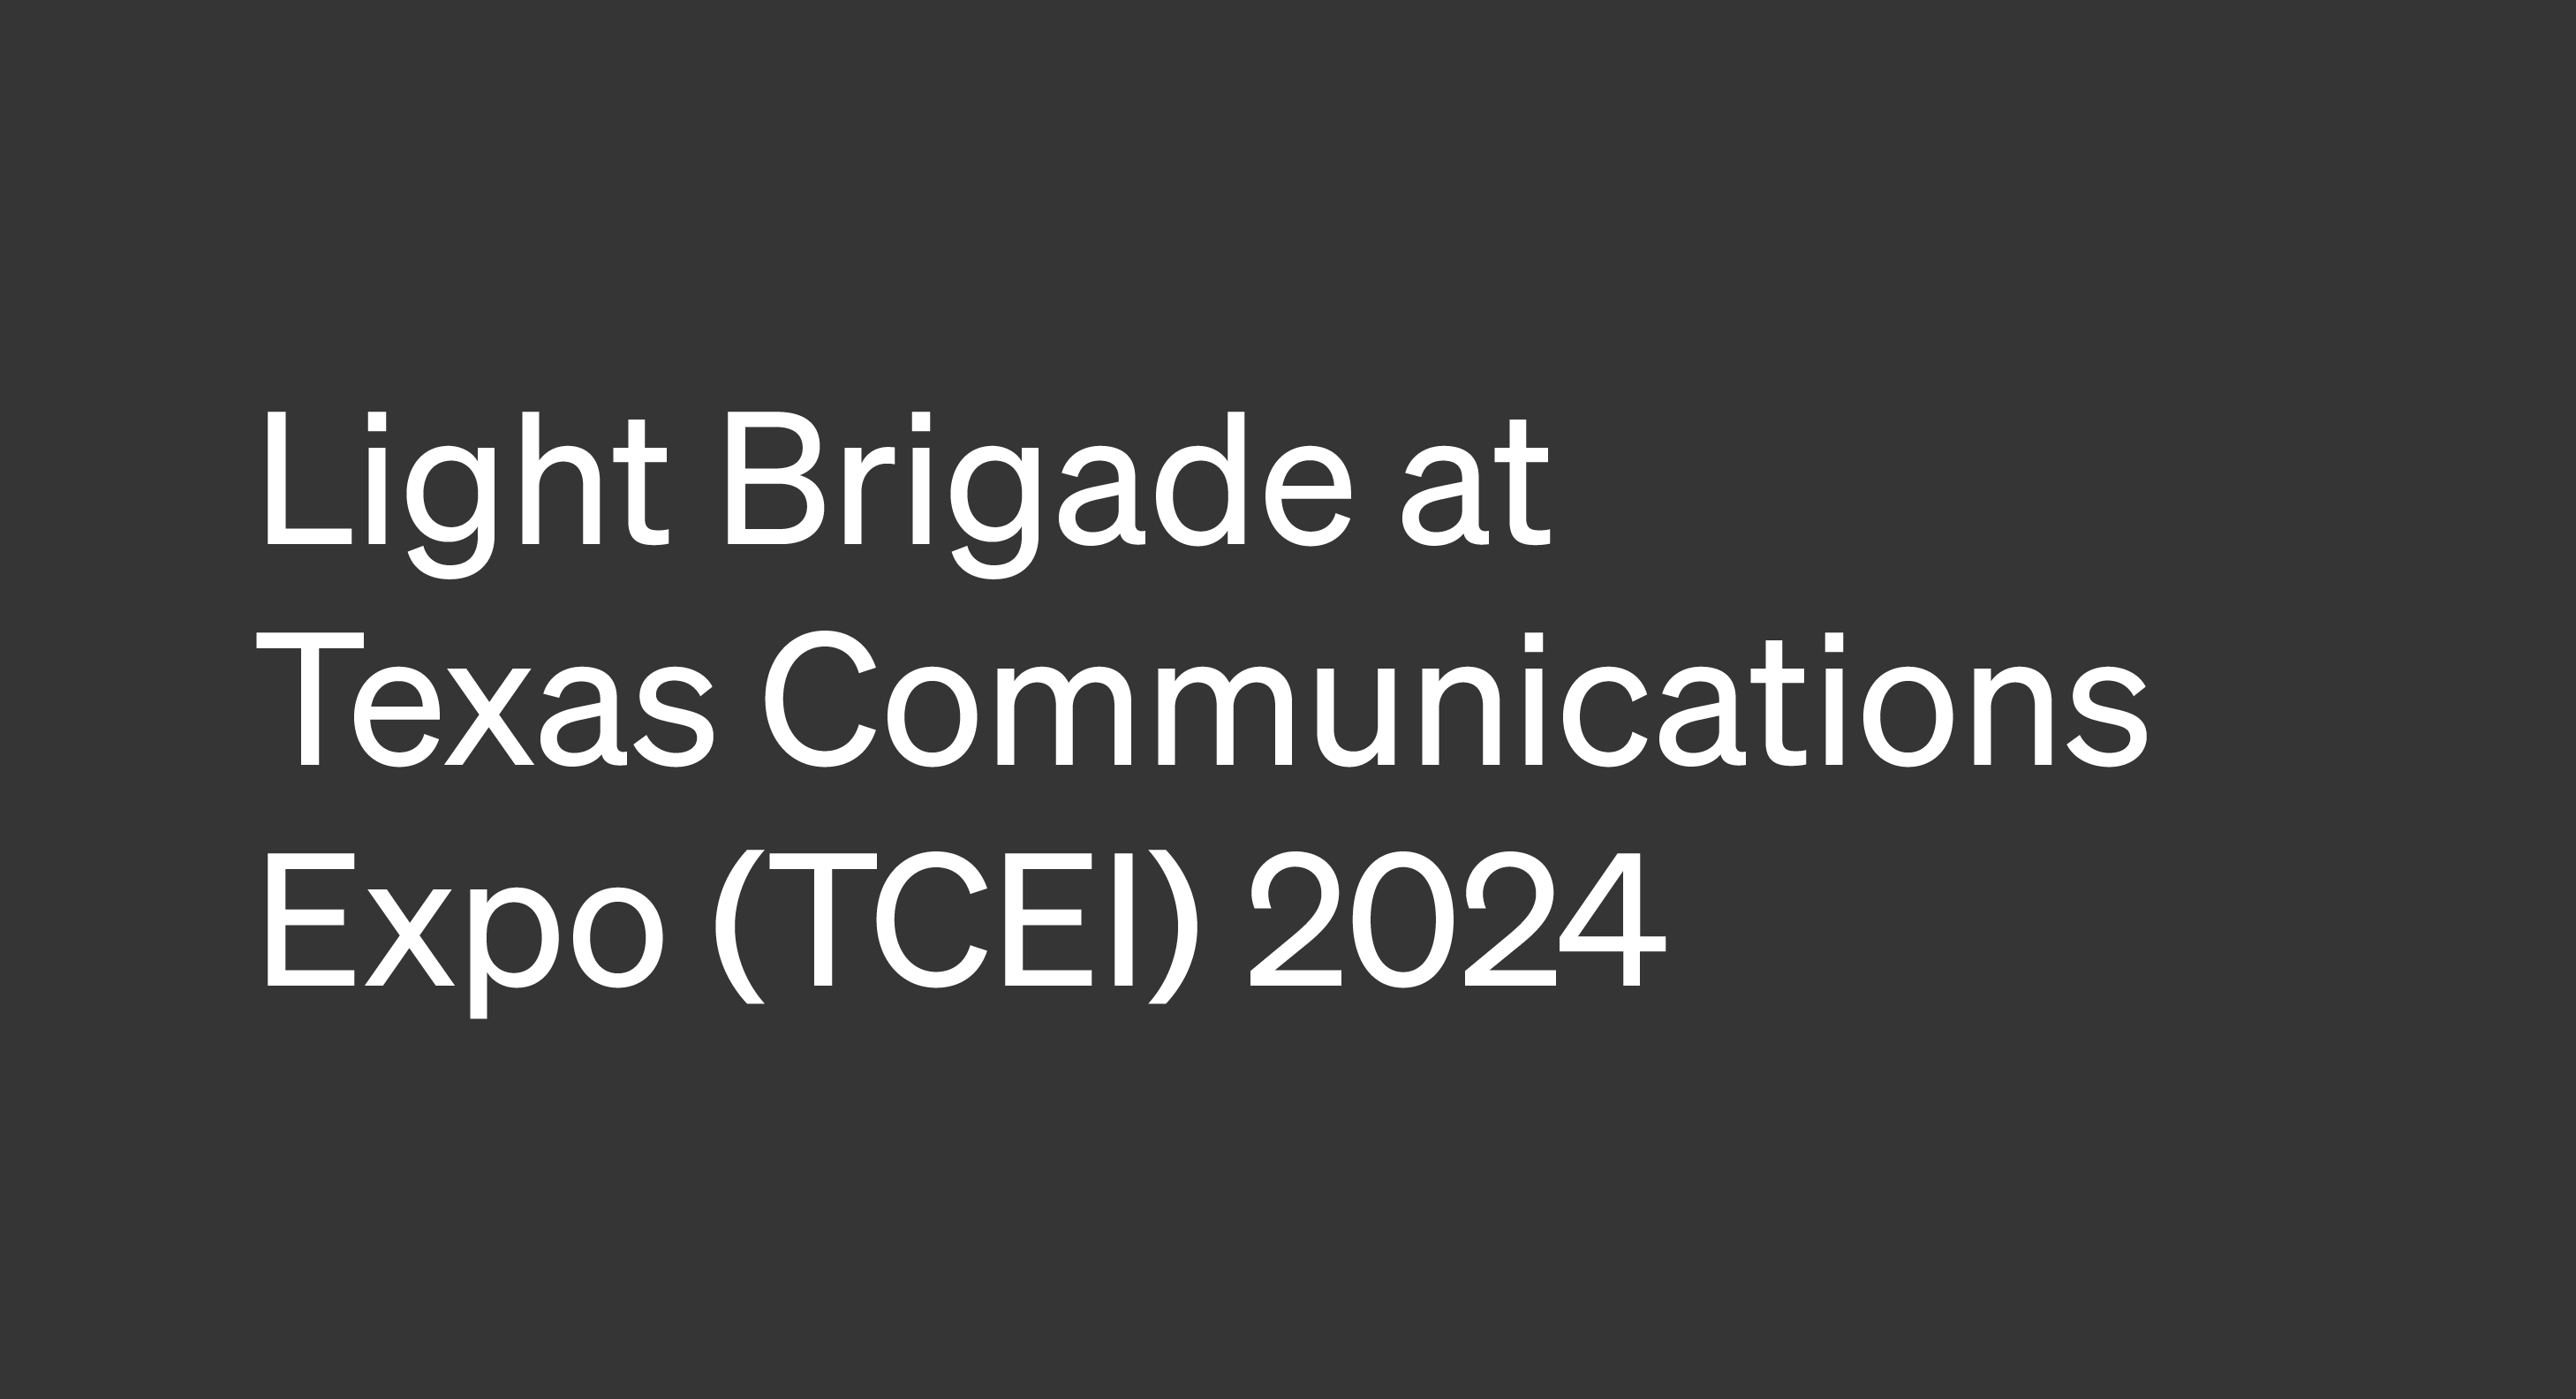 Texas Communications Expo (TCEI) 2024